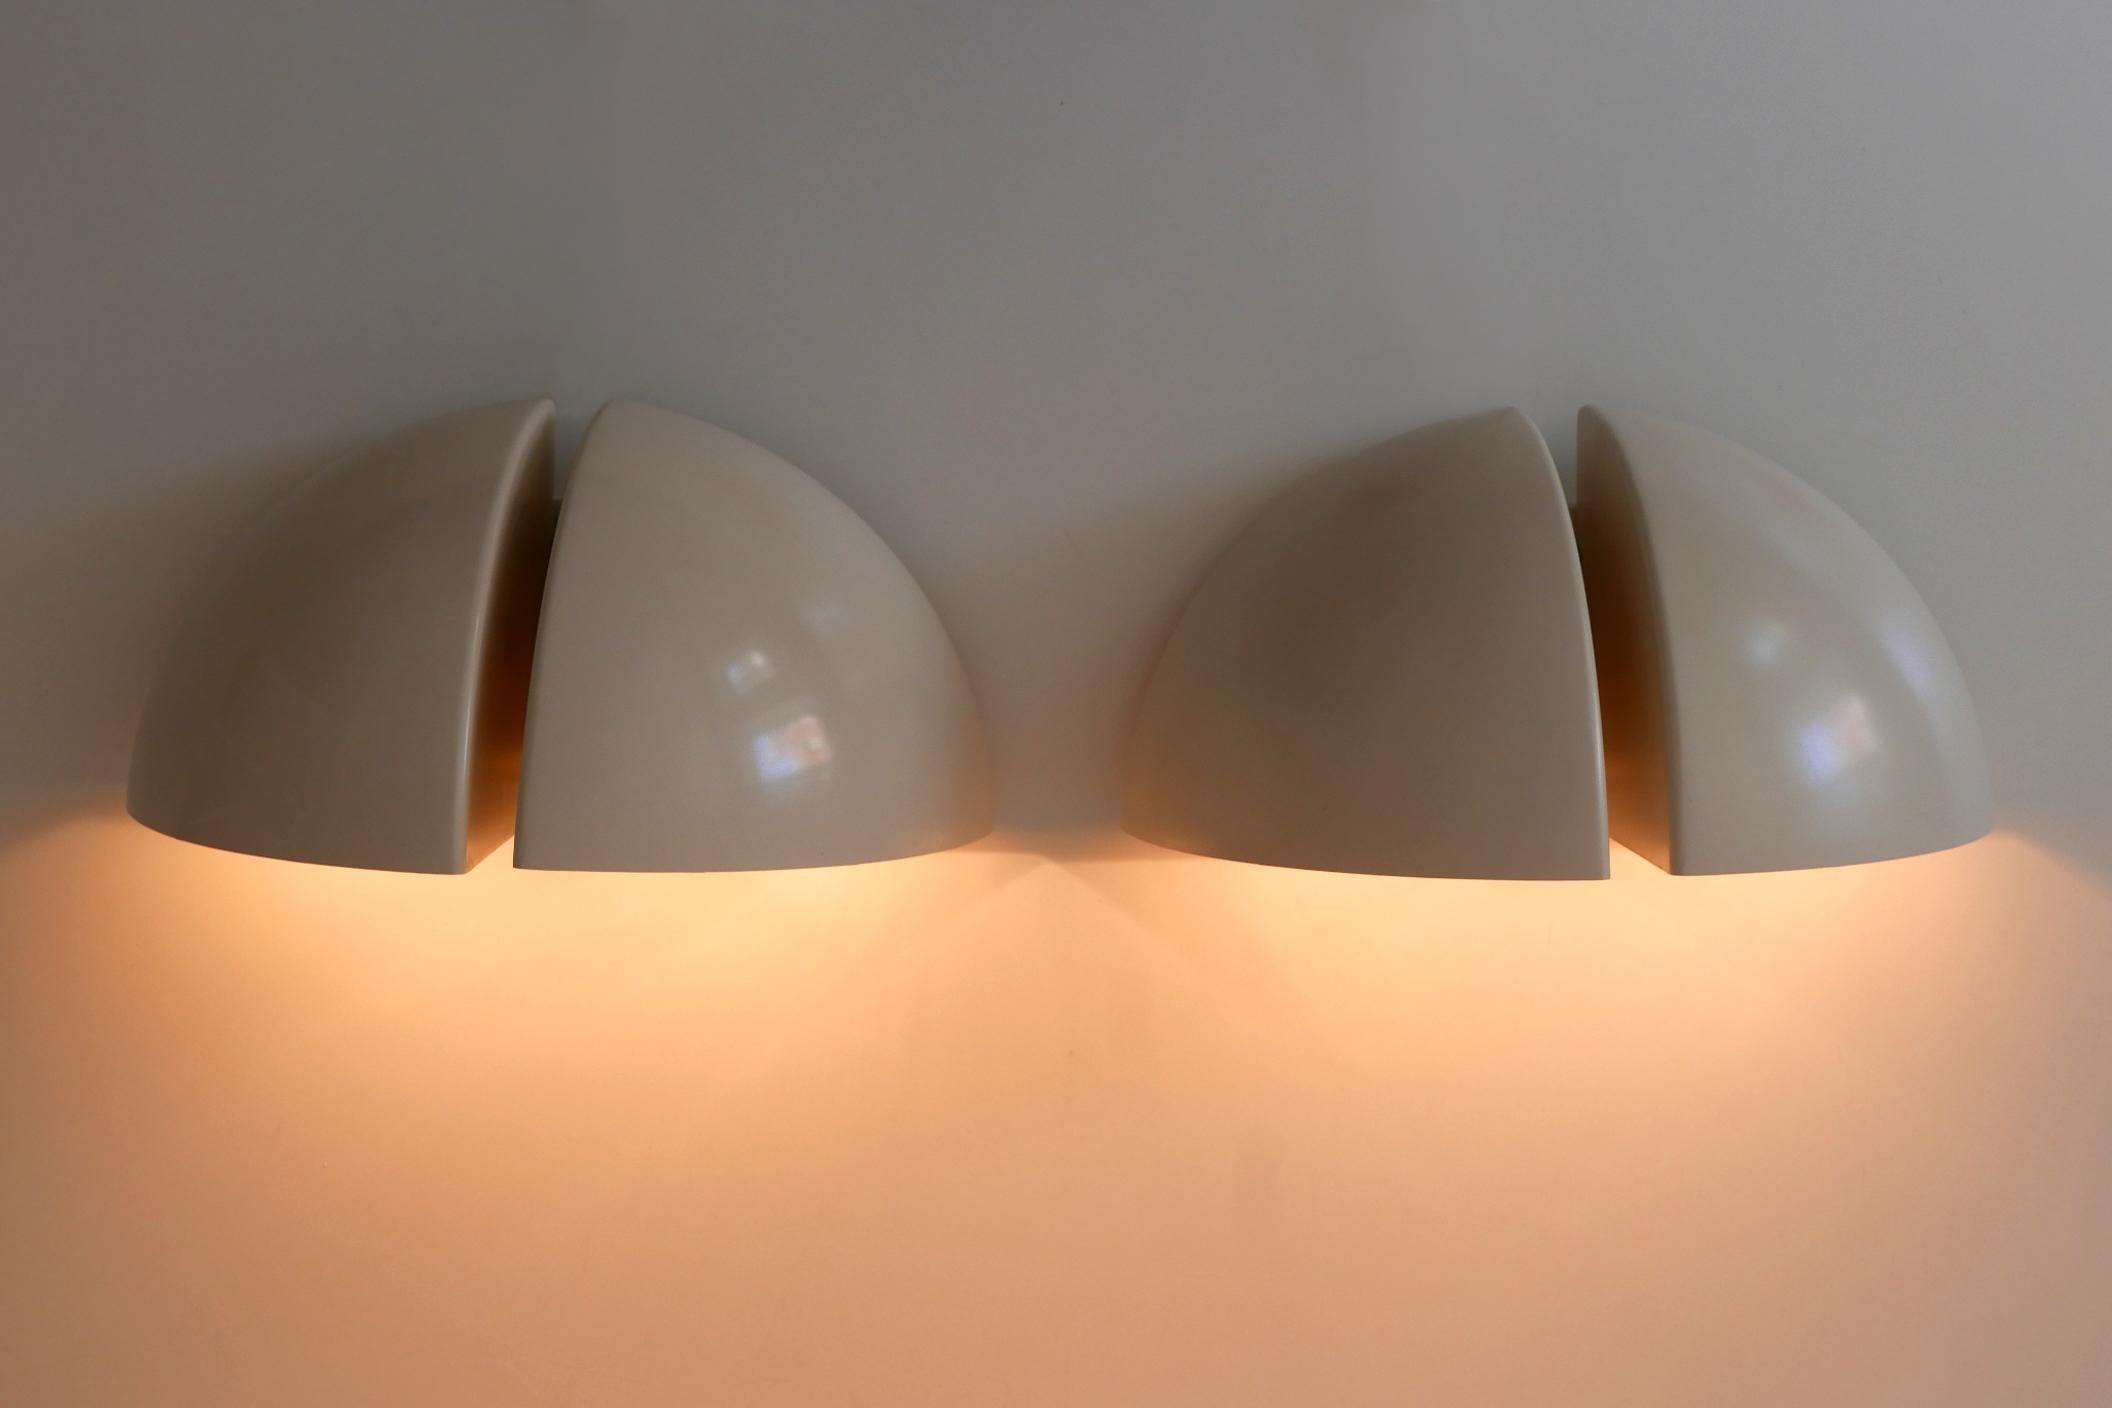 Dutch Set of Two RAAK Octavo Wall Lamps or Sconces by RAAK, Netherlands, 1970s For Sale